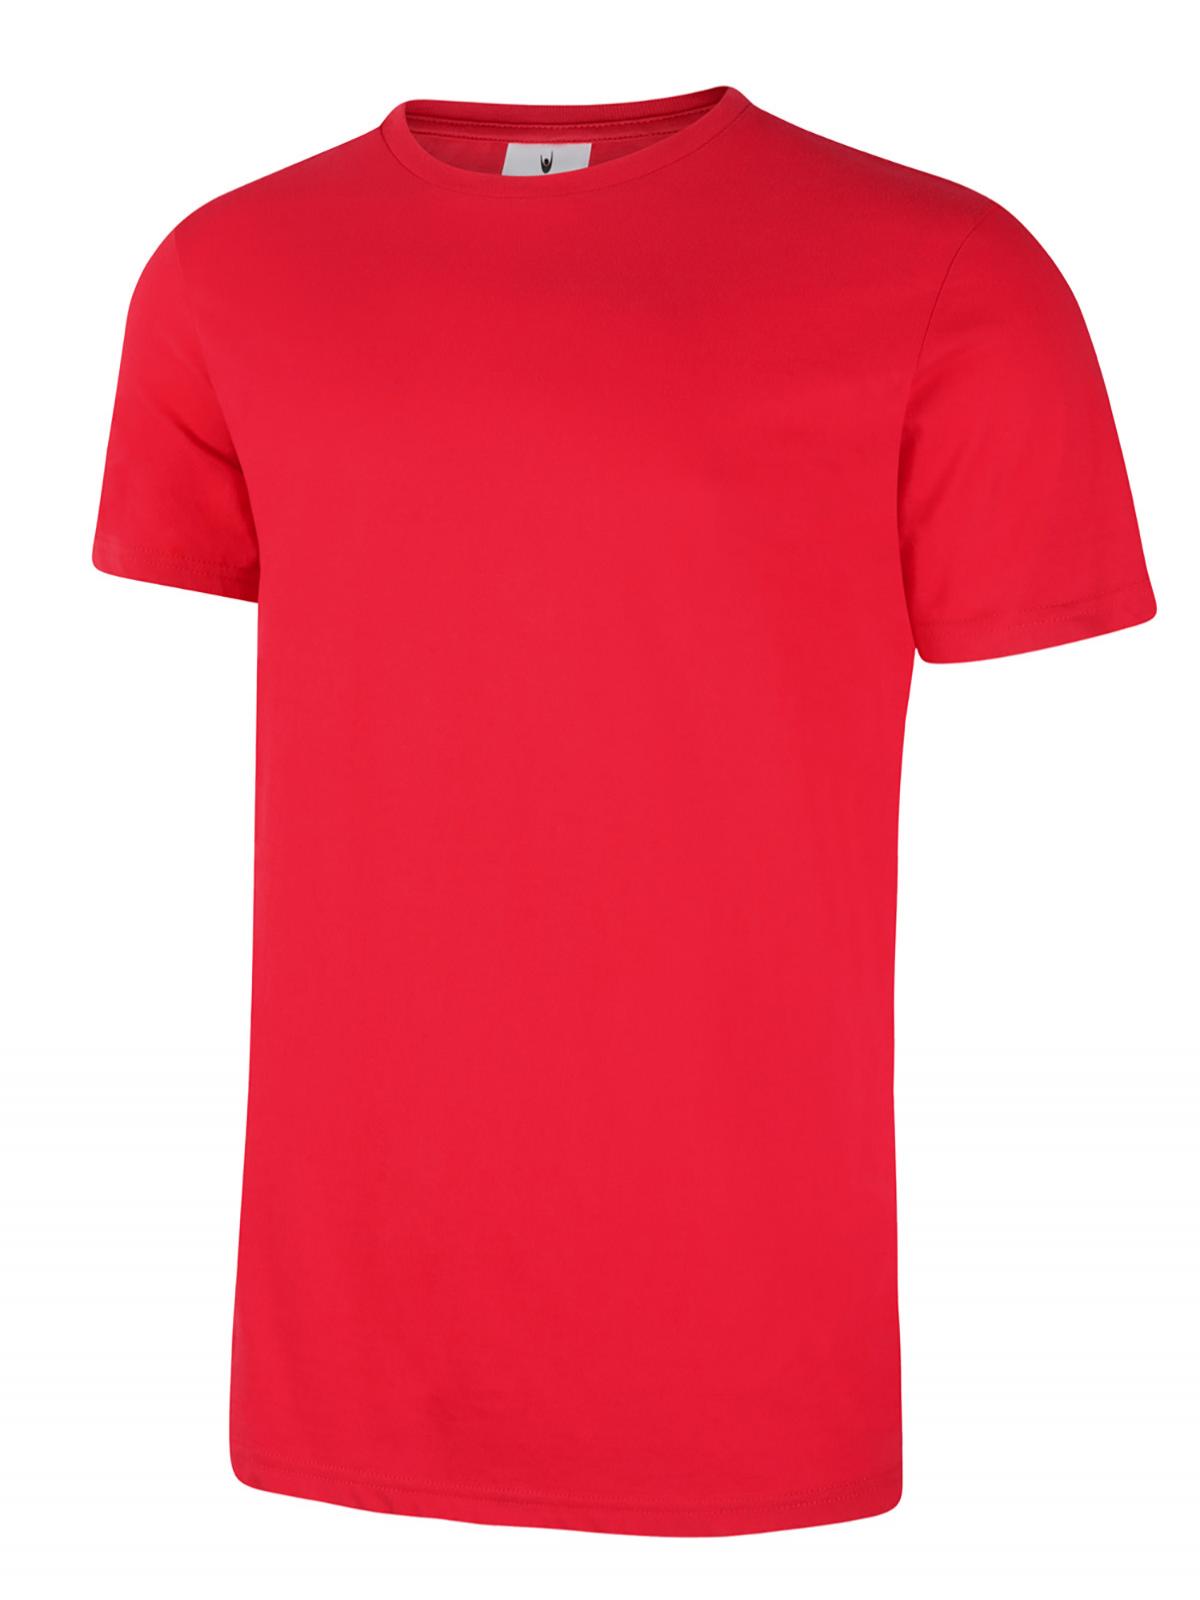 olympic_t-shirt_red